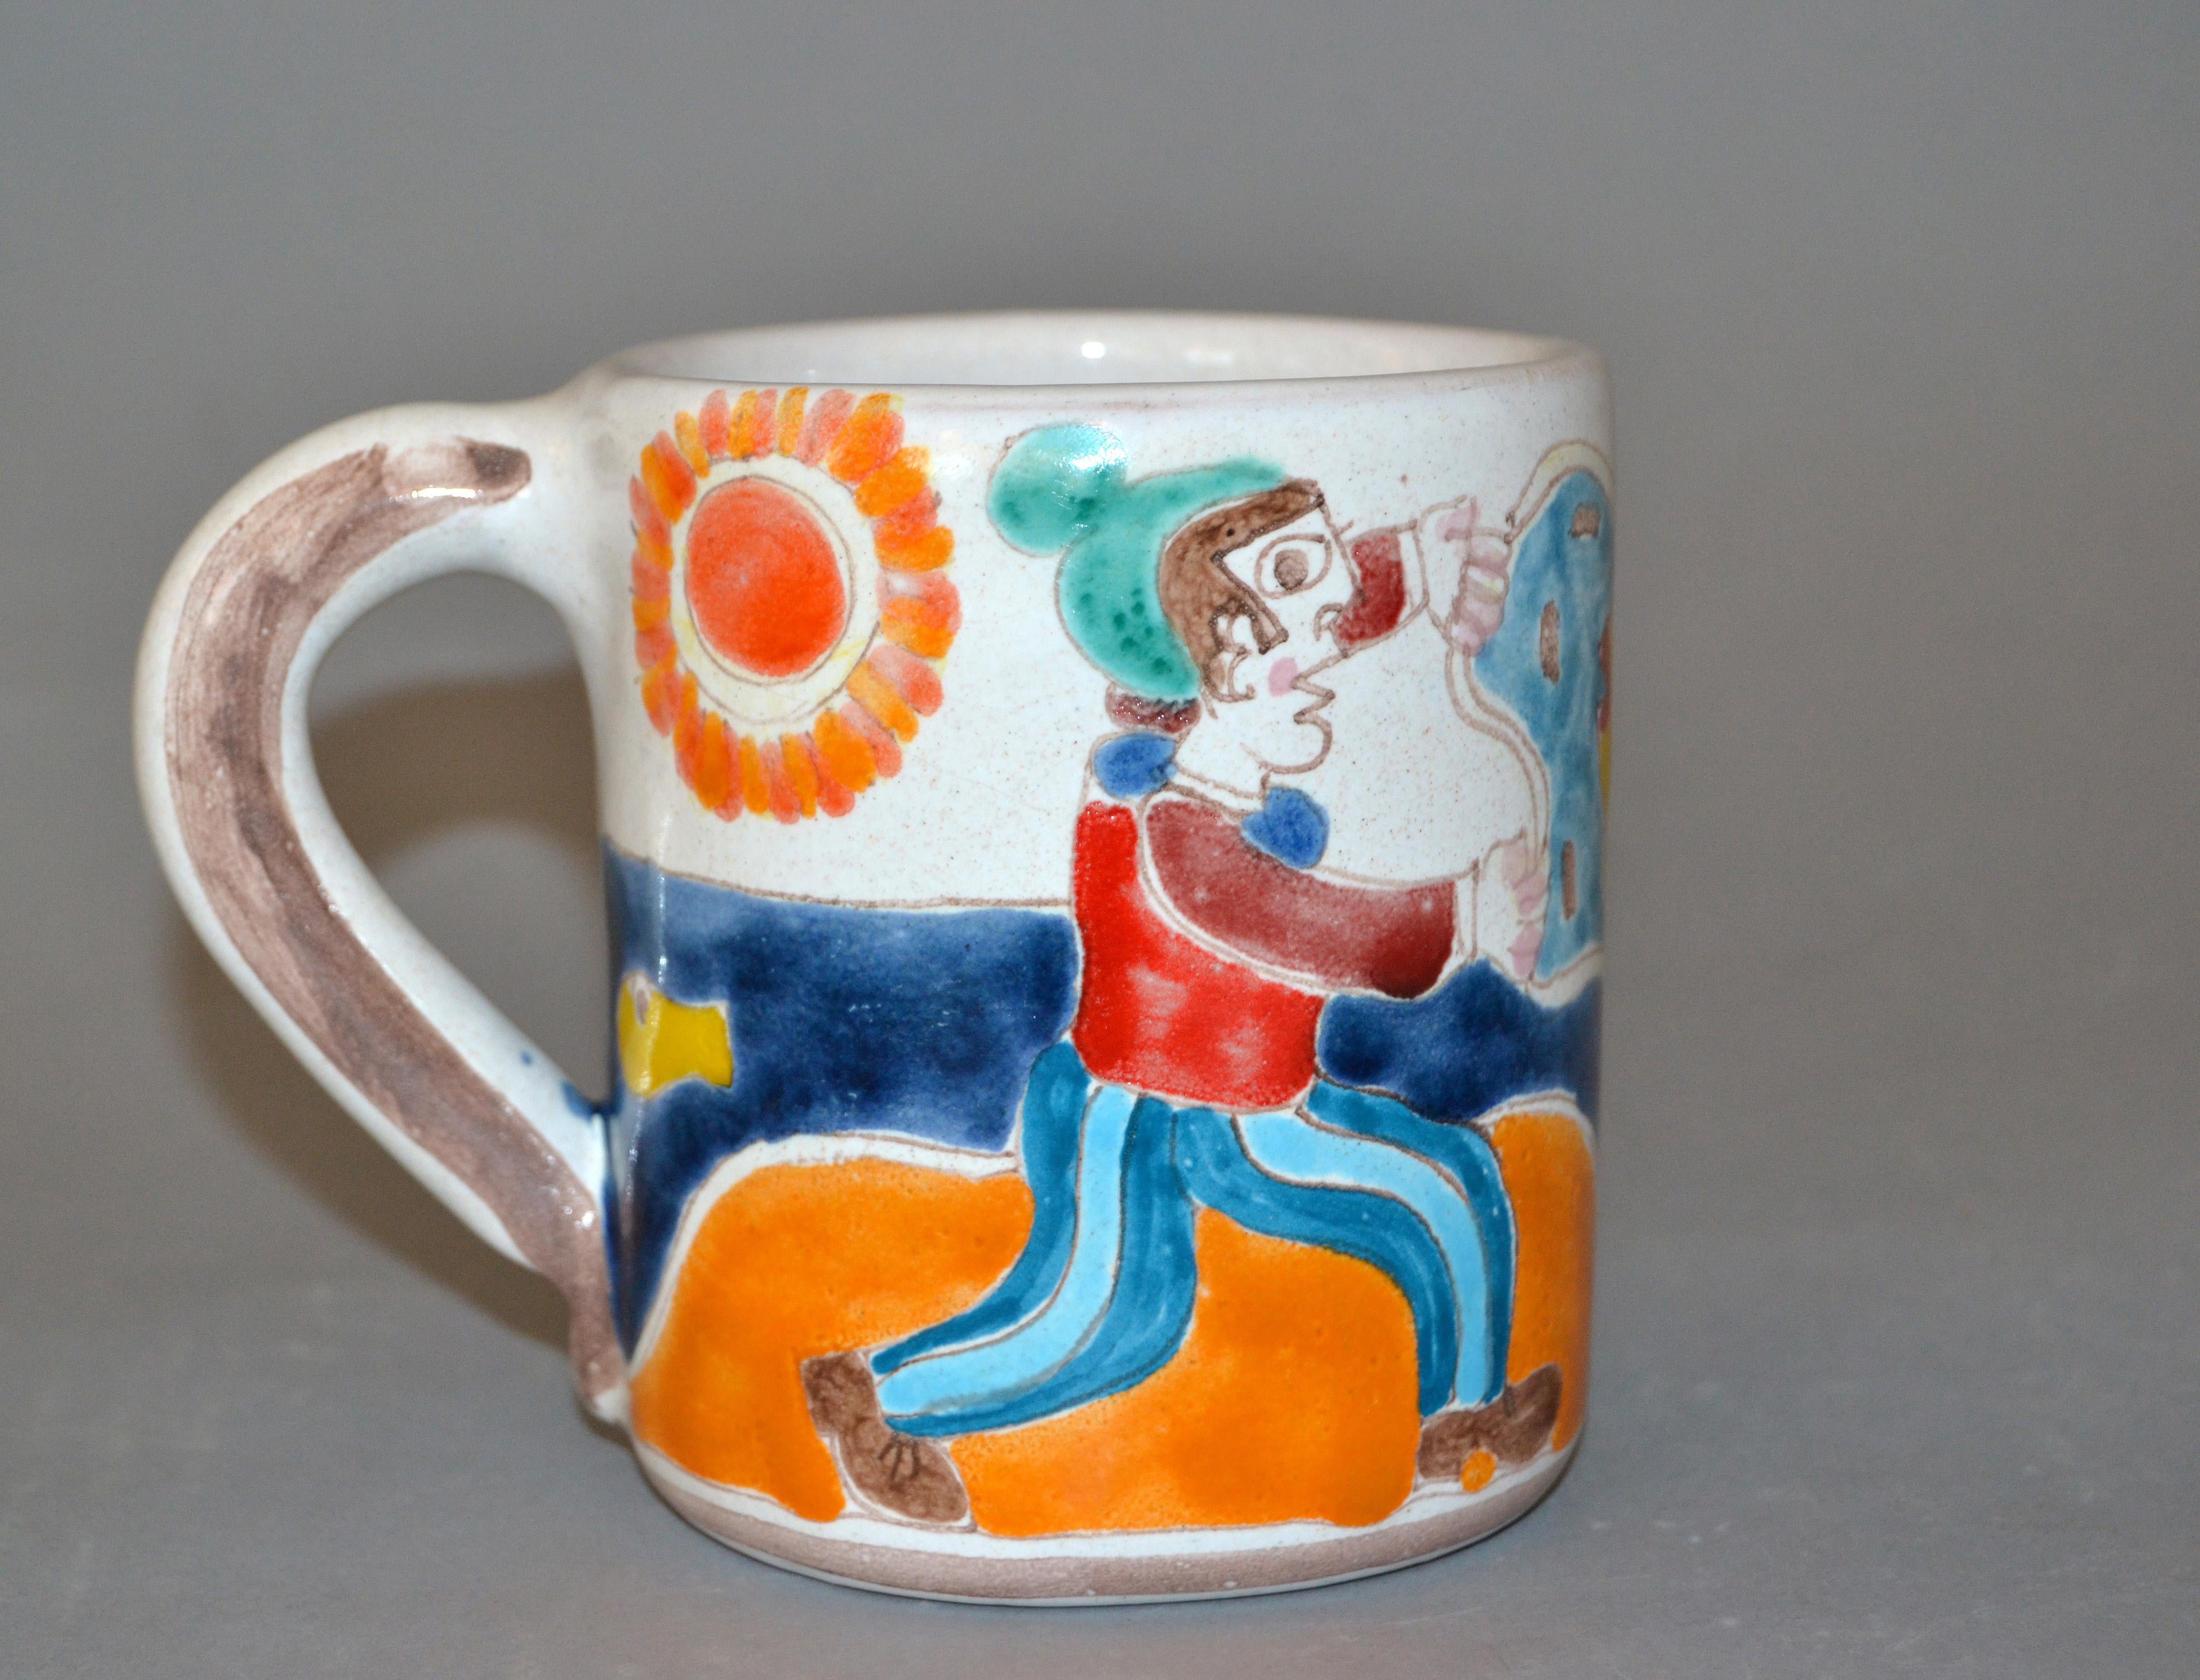 Original Italian Giovanni DeSimone hand painted art pottery, decor mug or cup with a scene of a fisherman casting his net and catching a family of fish on a sunny day.
The mug is glazed and very colorful.
DeSimone mark and numbered underneath,